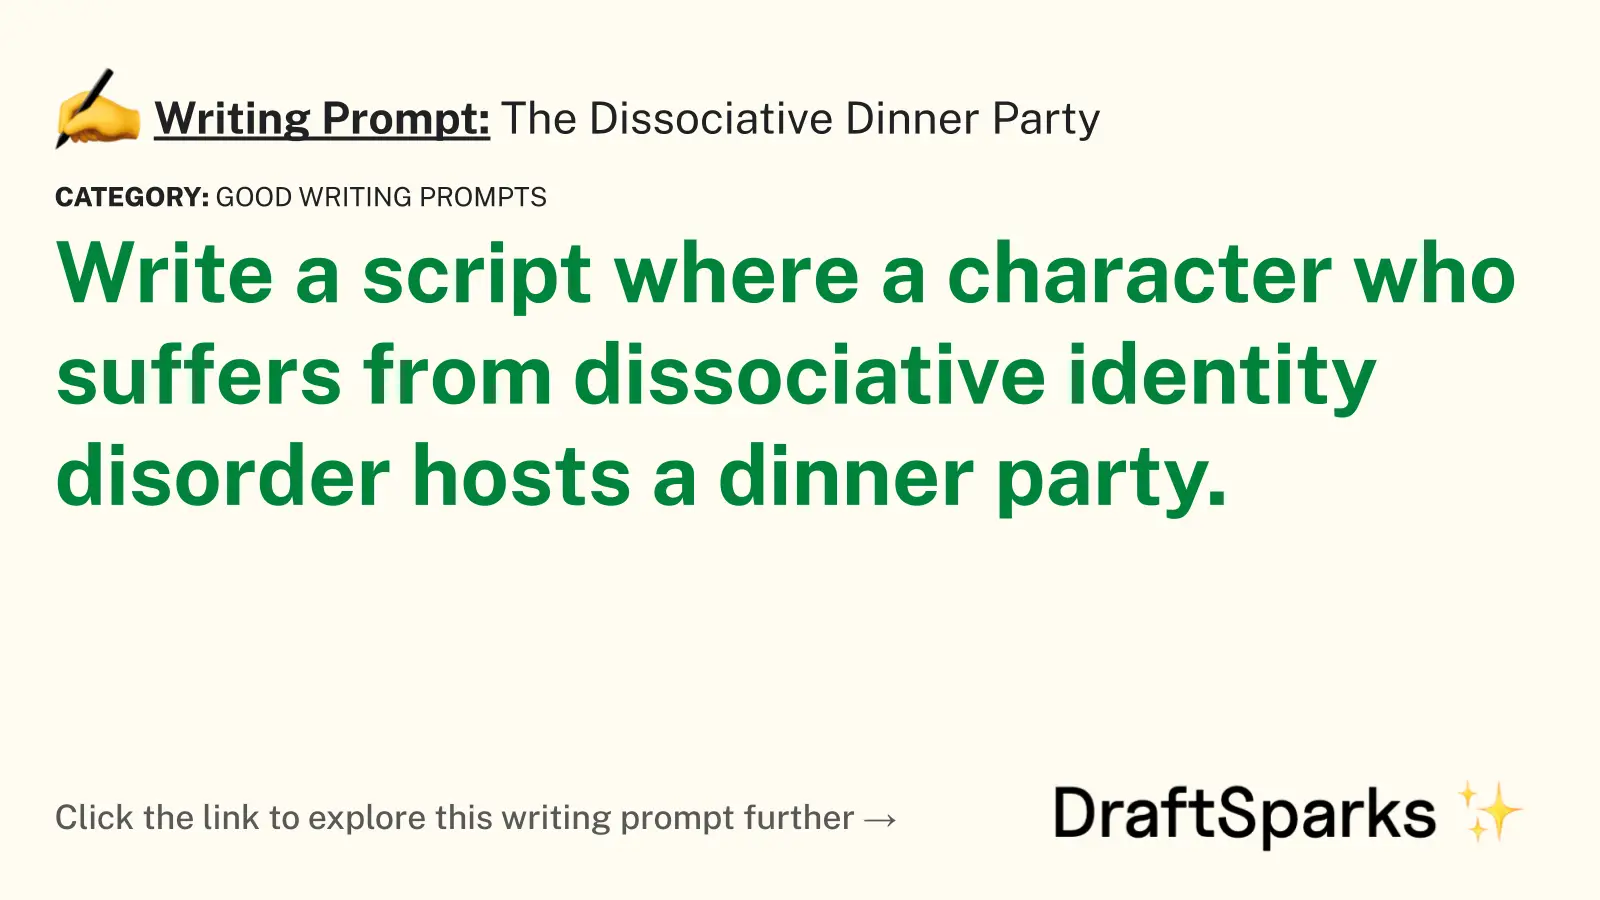 The Dissociative Dinner Party